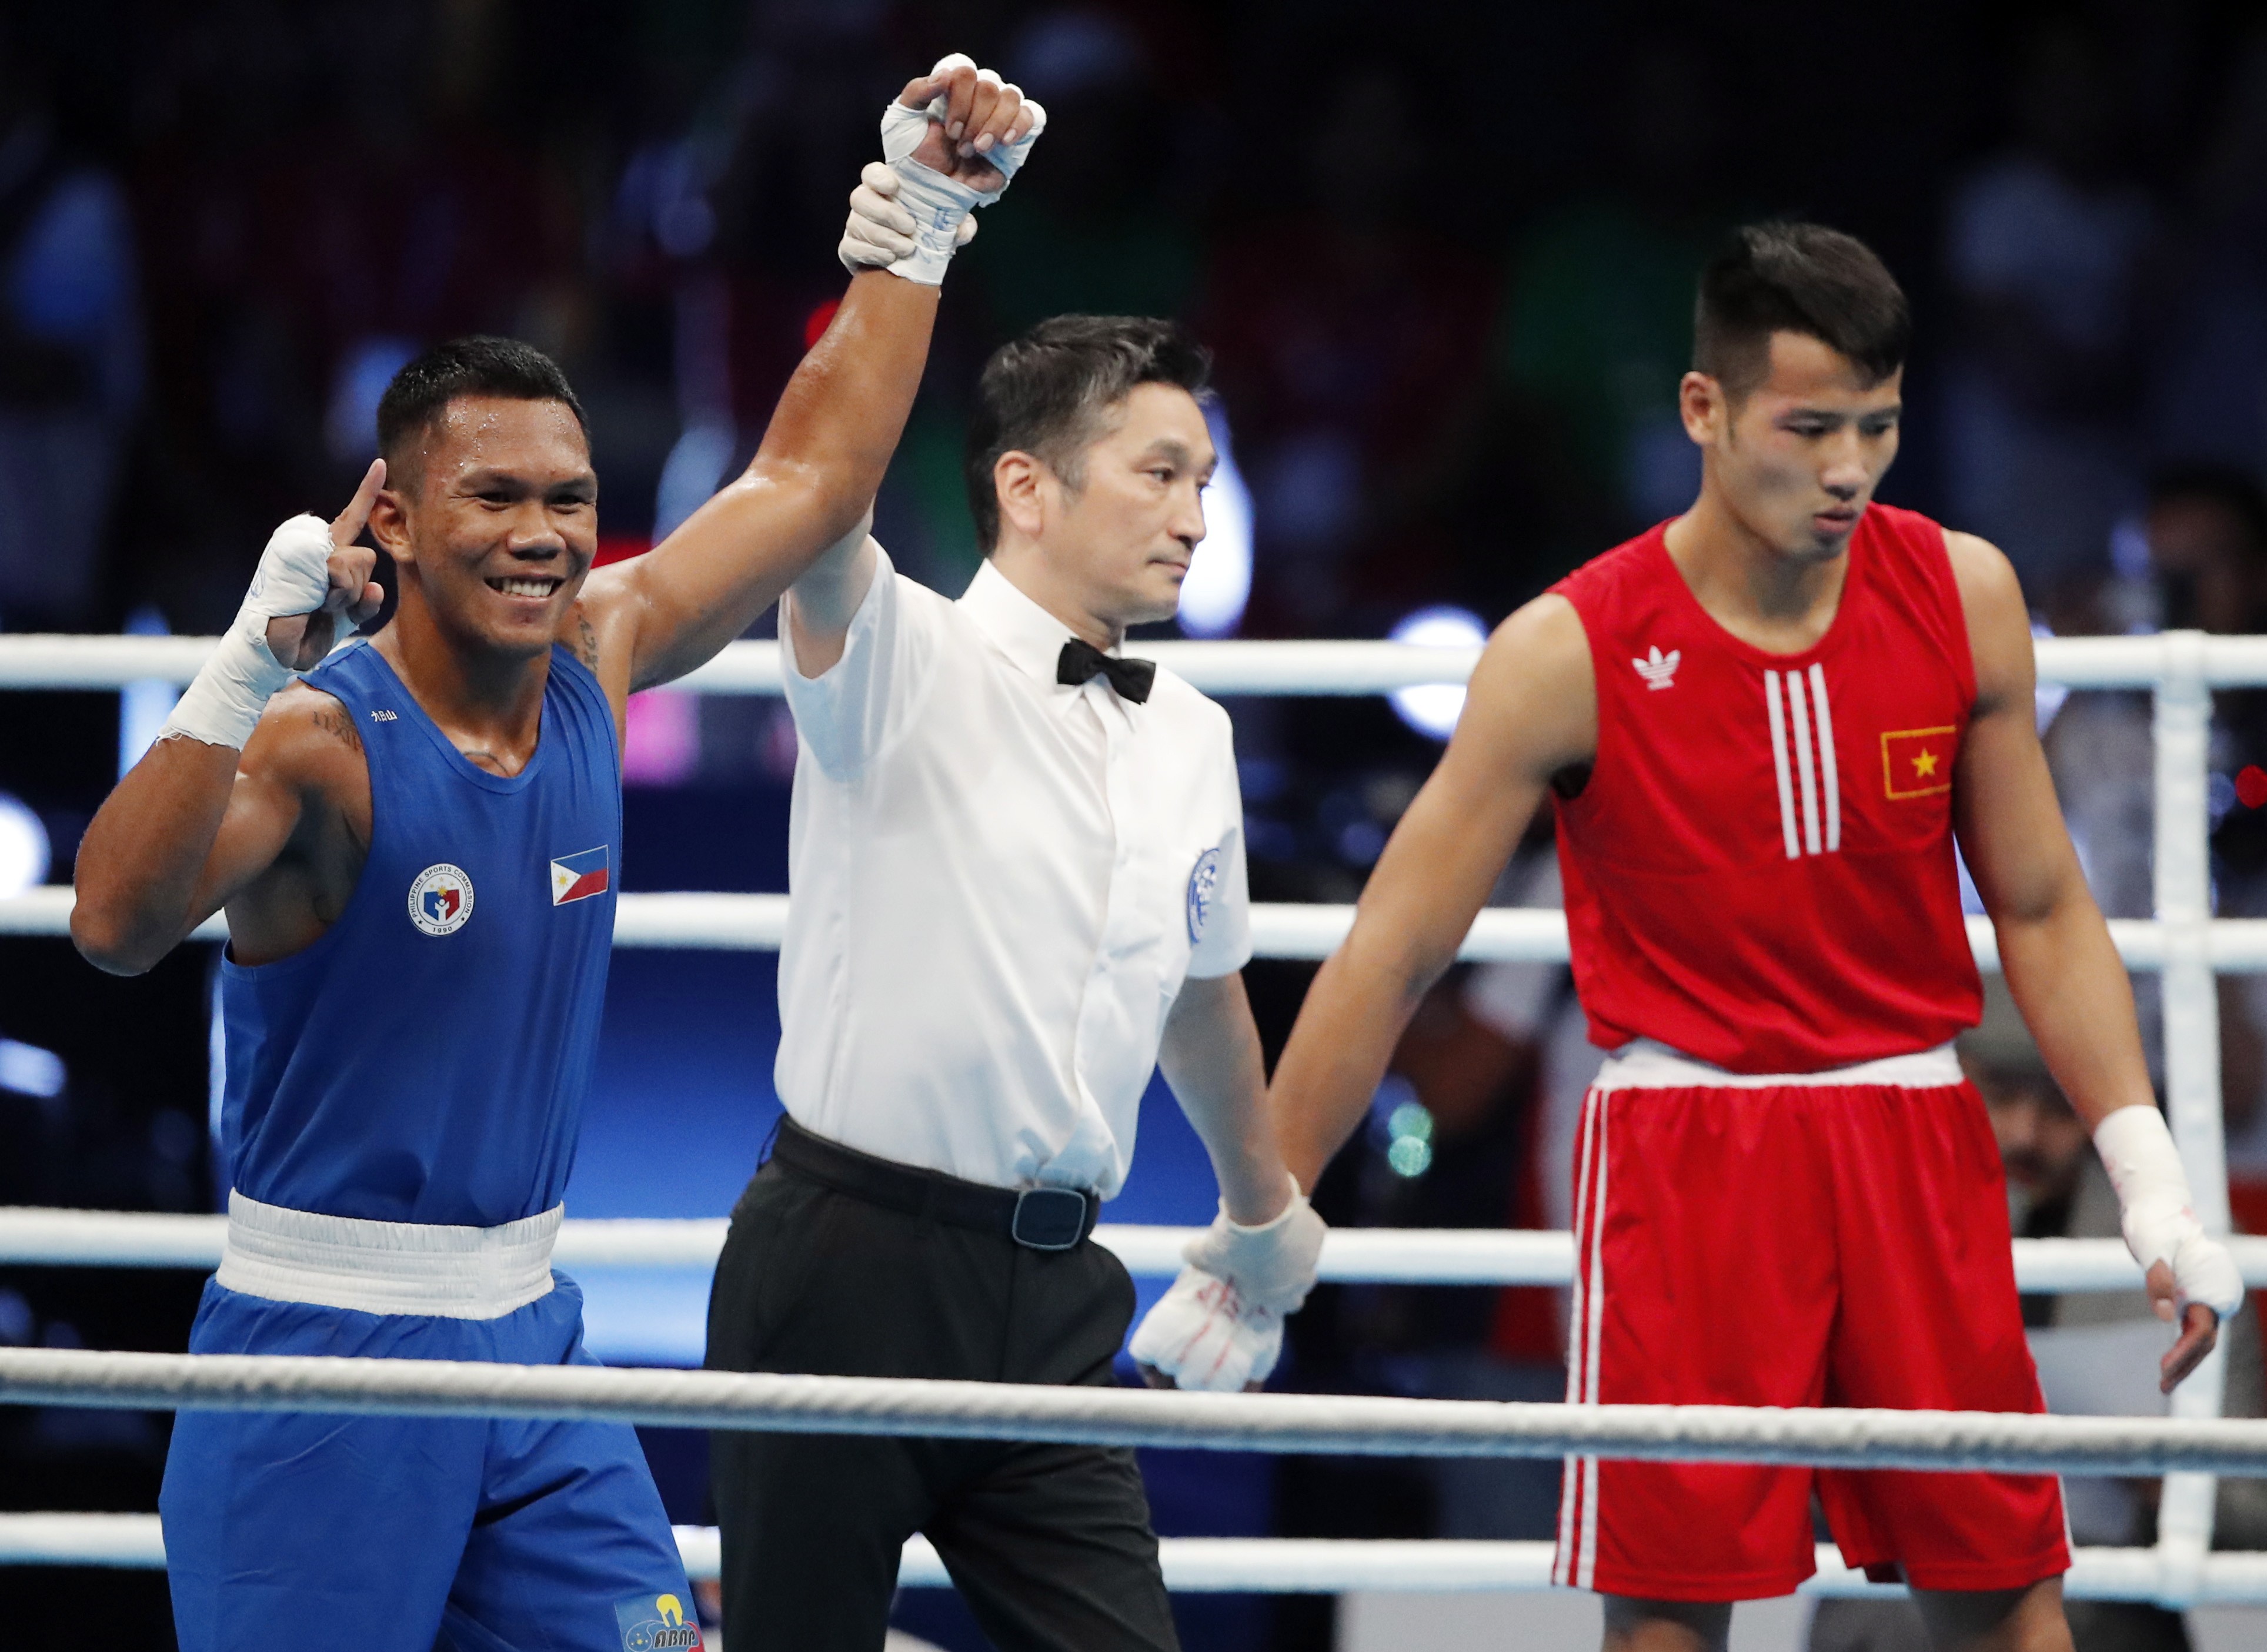 Eumir Marcial (left) has his arm raised after a first-round knockout in the men’s boxing middleweight final in Manila, the Philippines. Photo: EPA